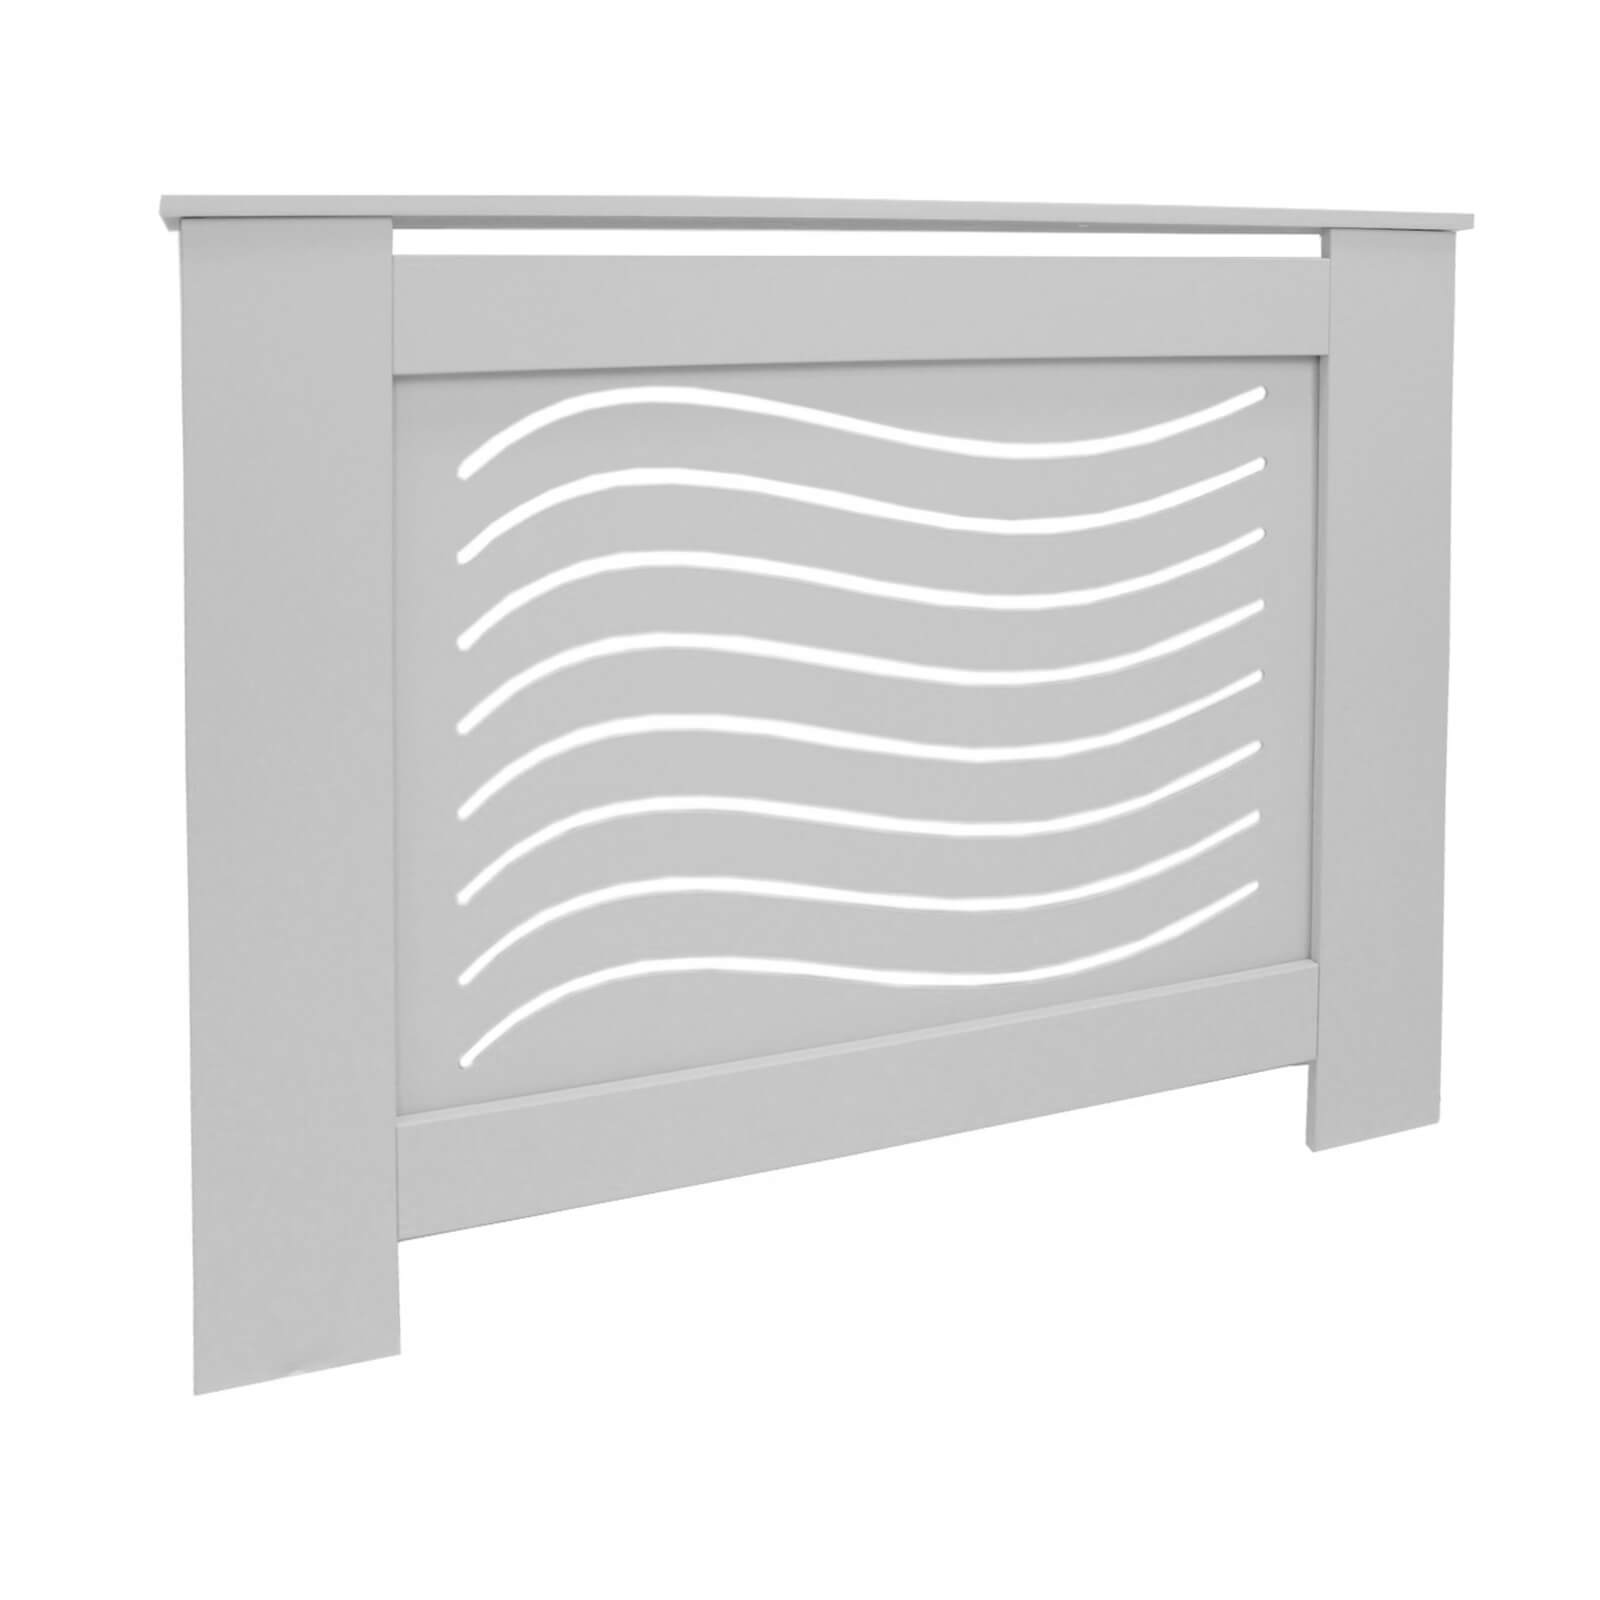 Wave White Radiator Cover - Small